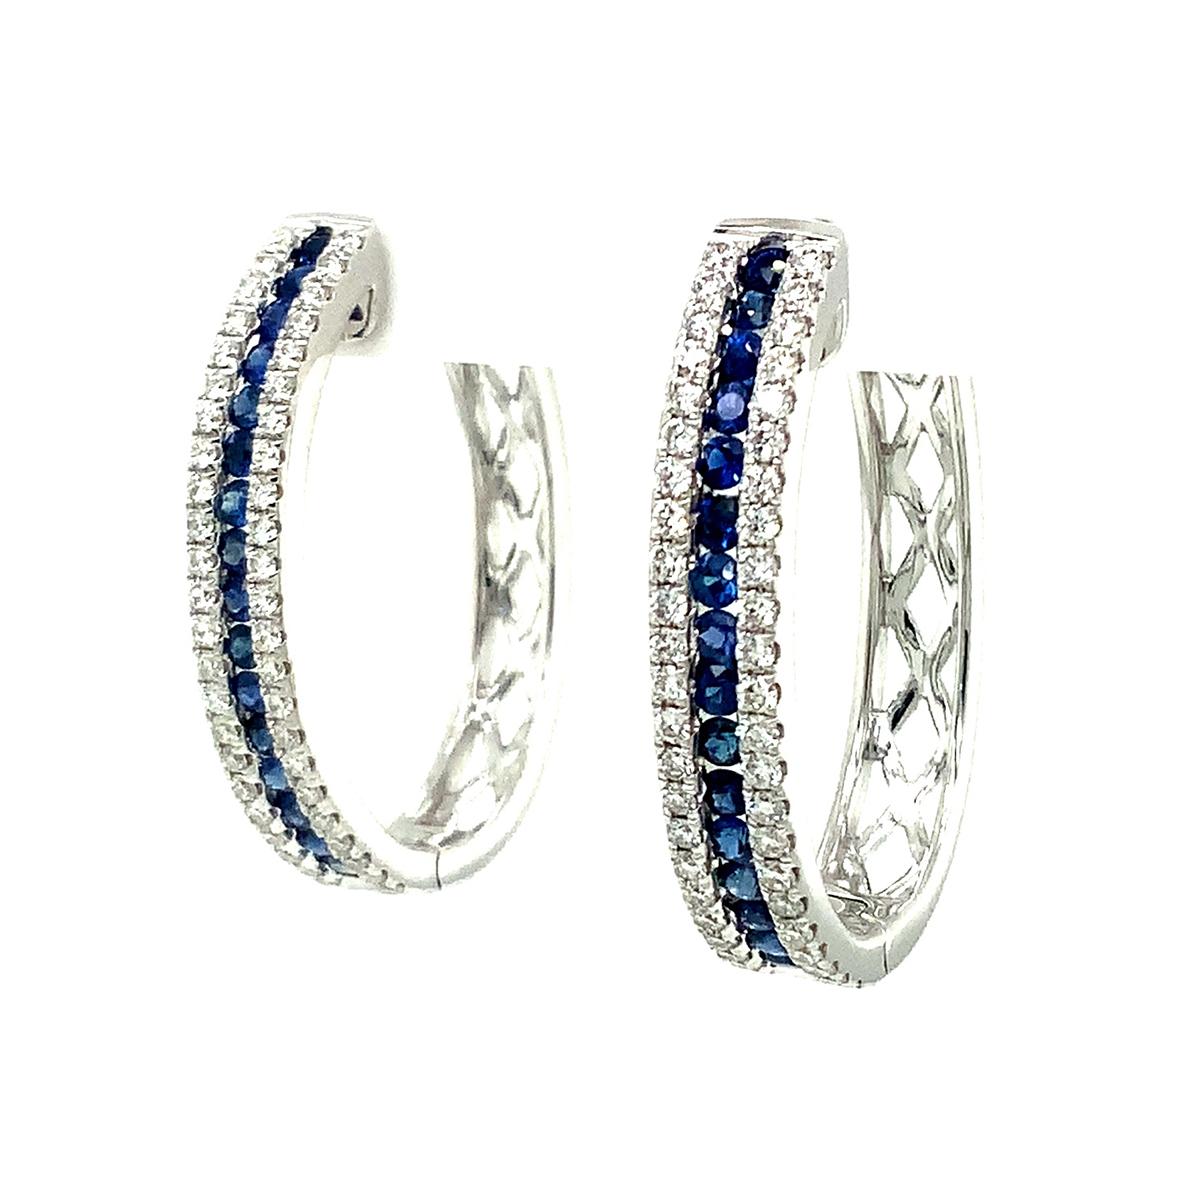 Modern Afarin Collection Blue Sapphire and Diamond Oval Shaped Hoop Earrings Set in 18k For Sale